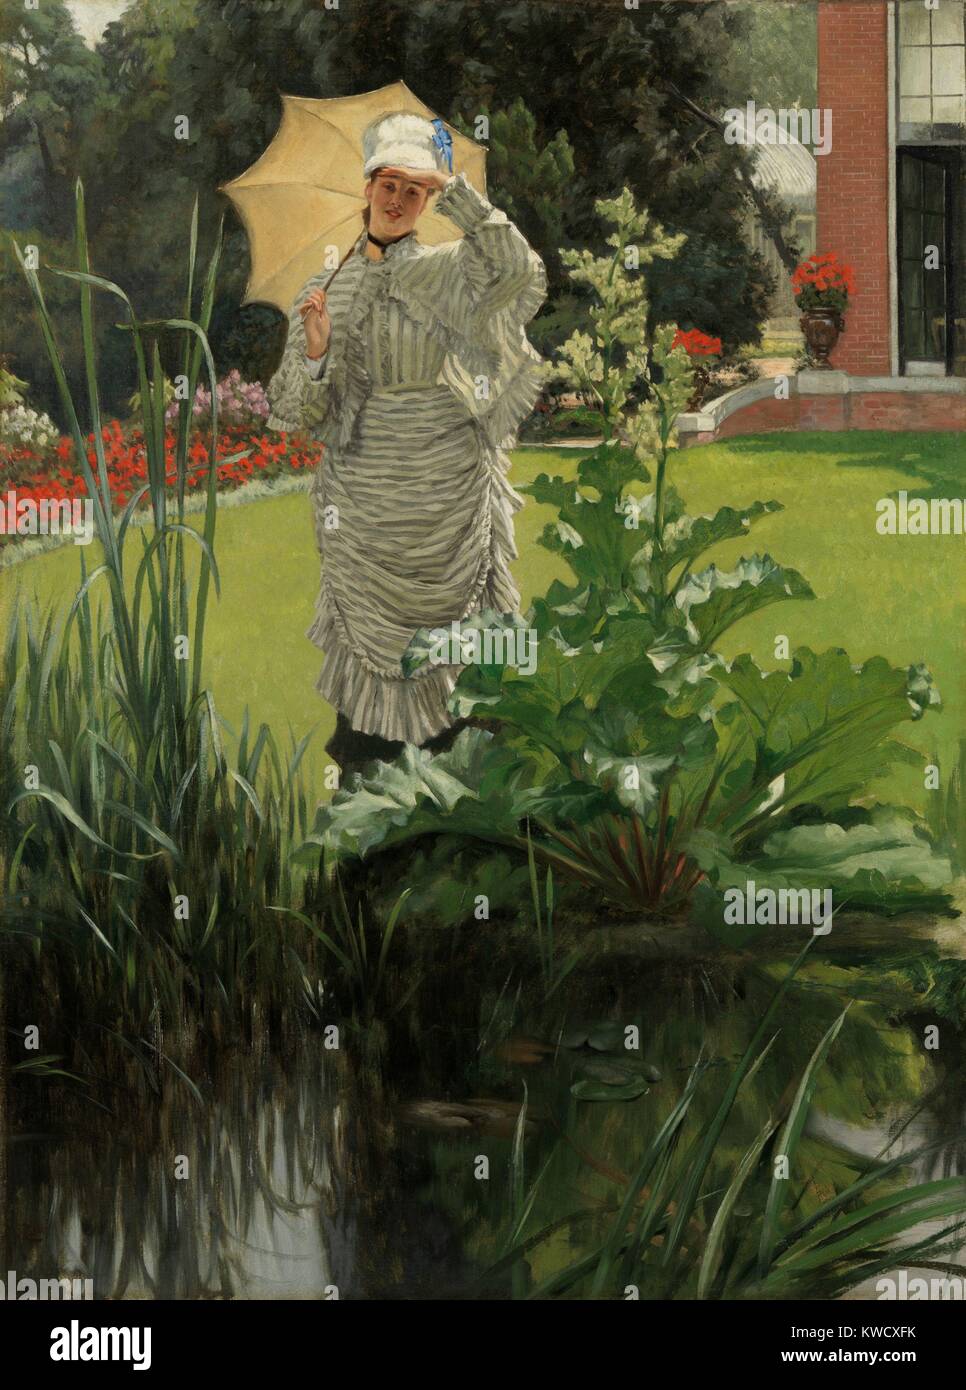 Spring Morning, by James Tissot, 1875, French realist, impressionistic, painting, oil on canvas. The clump of vegetation in the foreground was unconventional, and similar to compositional devices used by the impressionists and Japanese prints (BSLOC_2017_3_164) Stock Photo